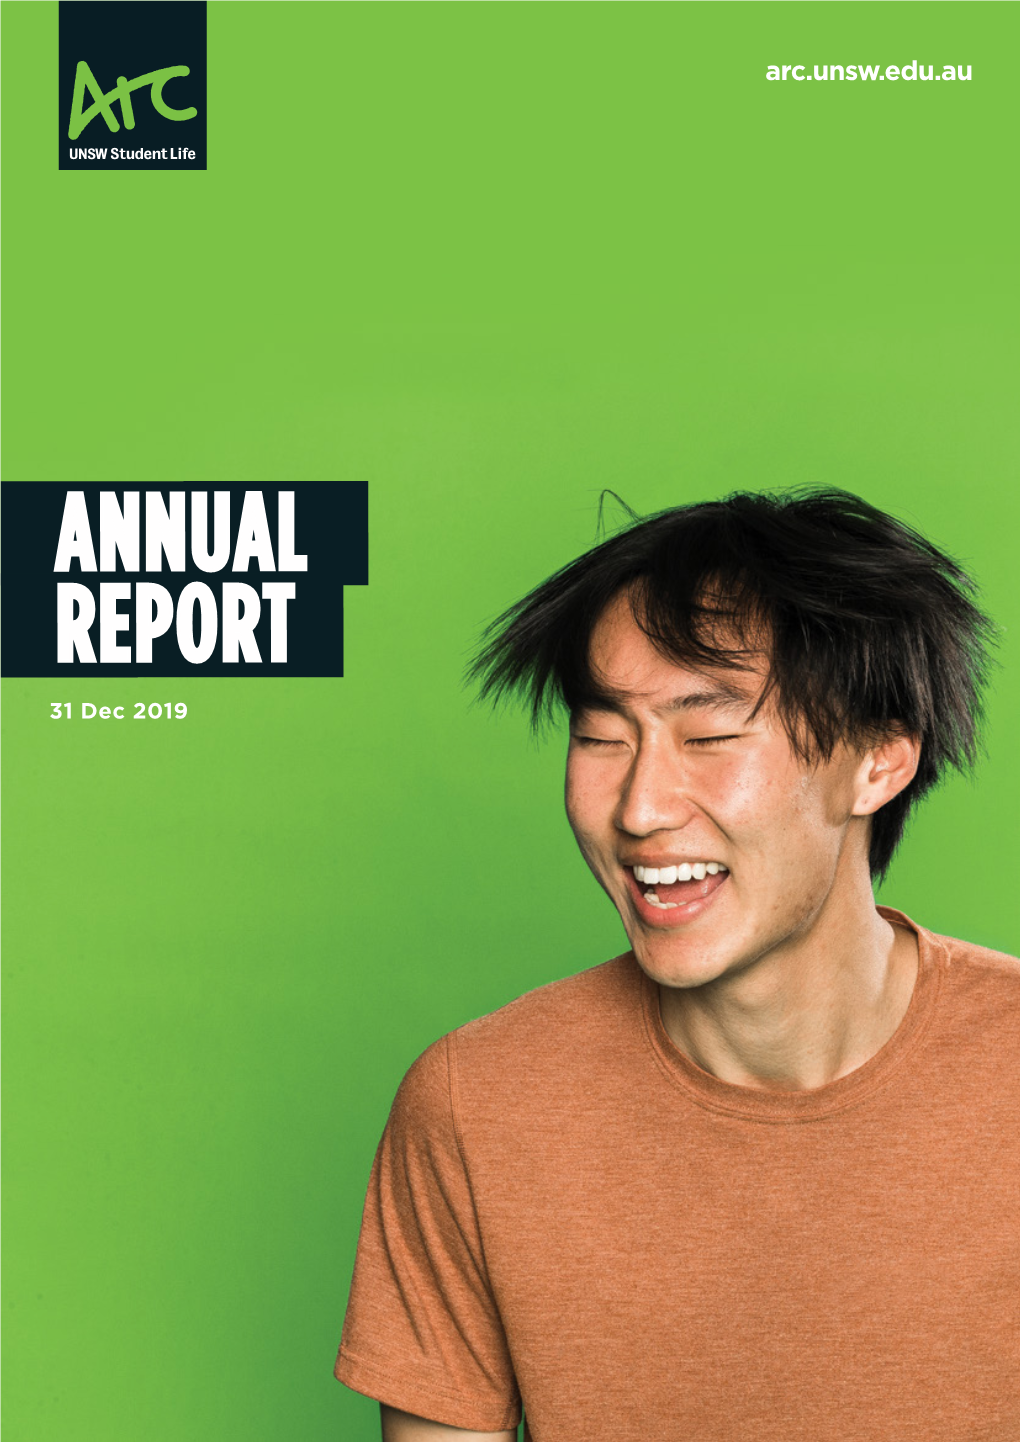 Arc Annual Report 2019 Contents